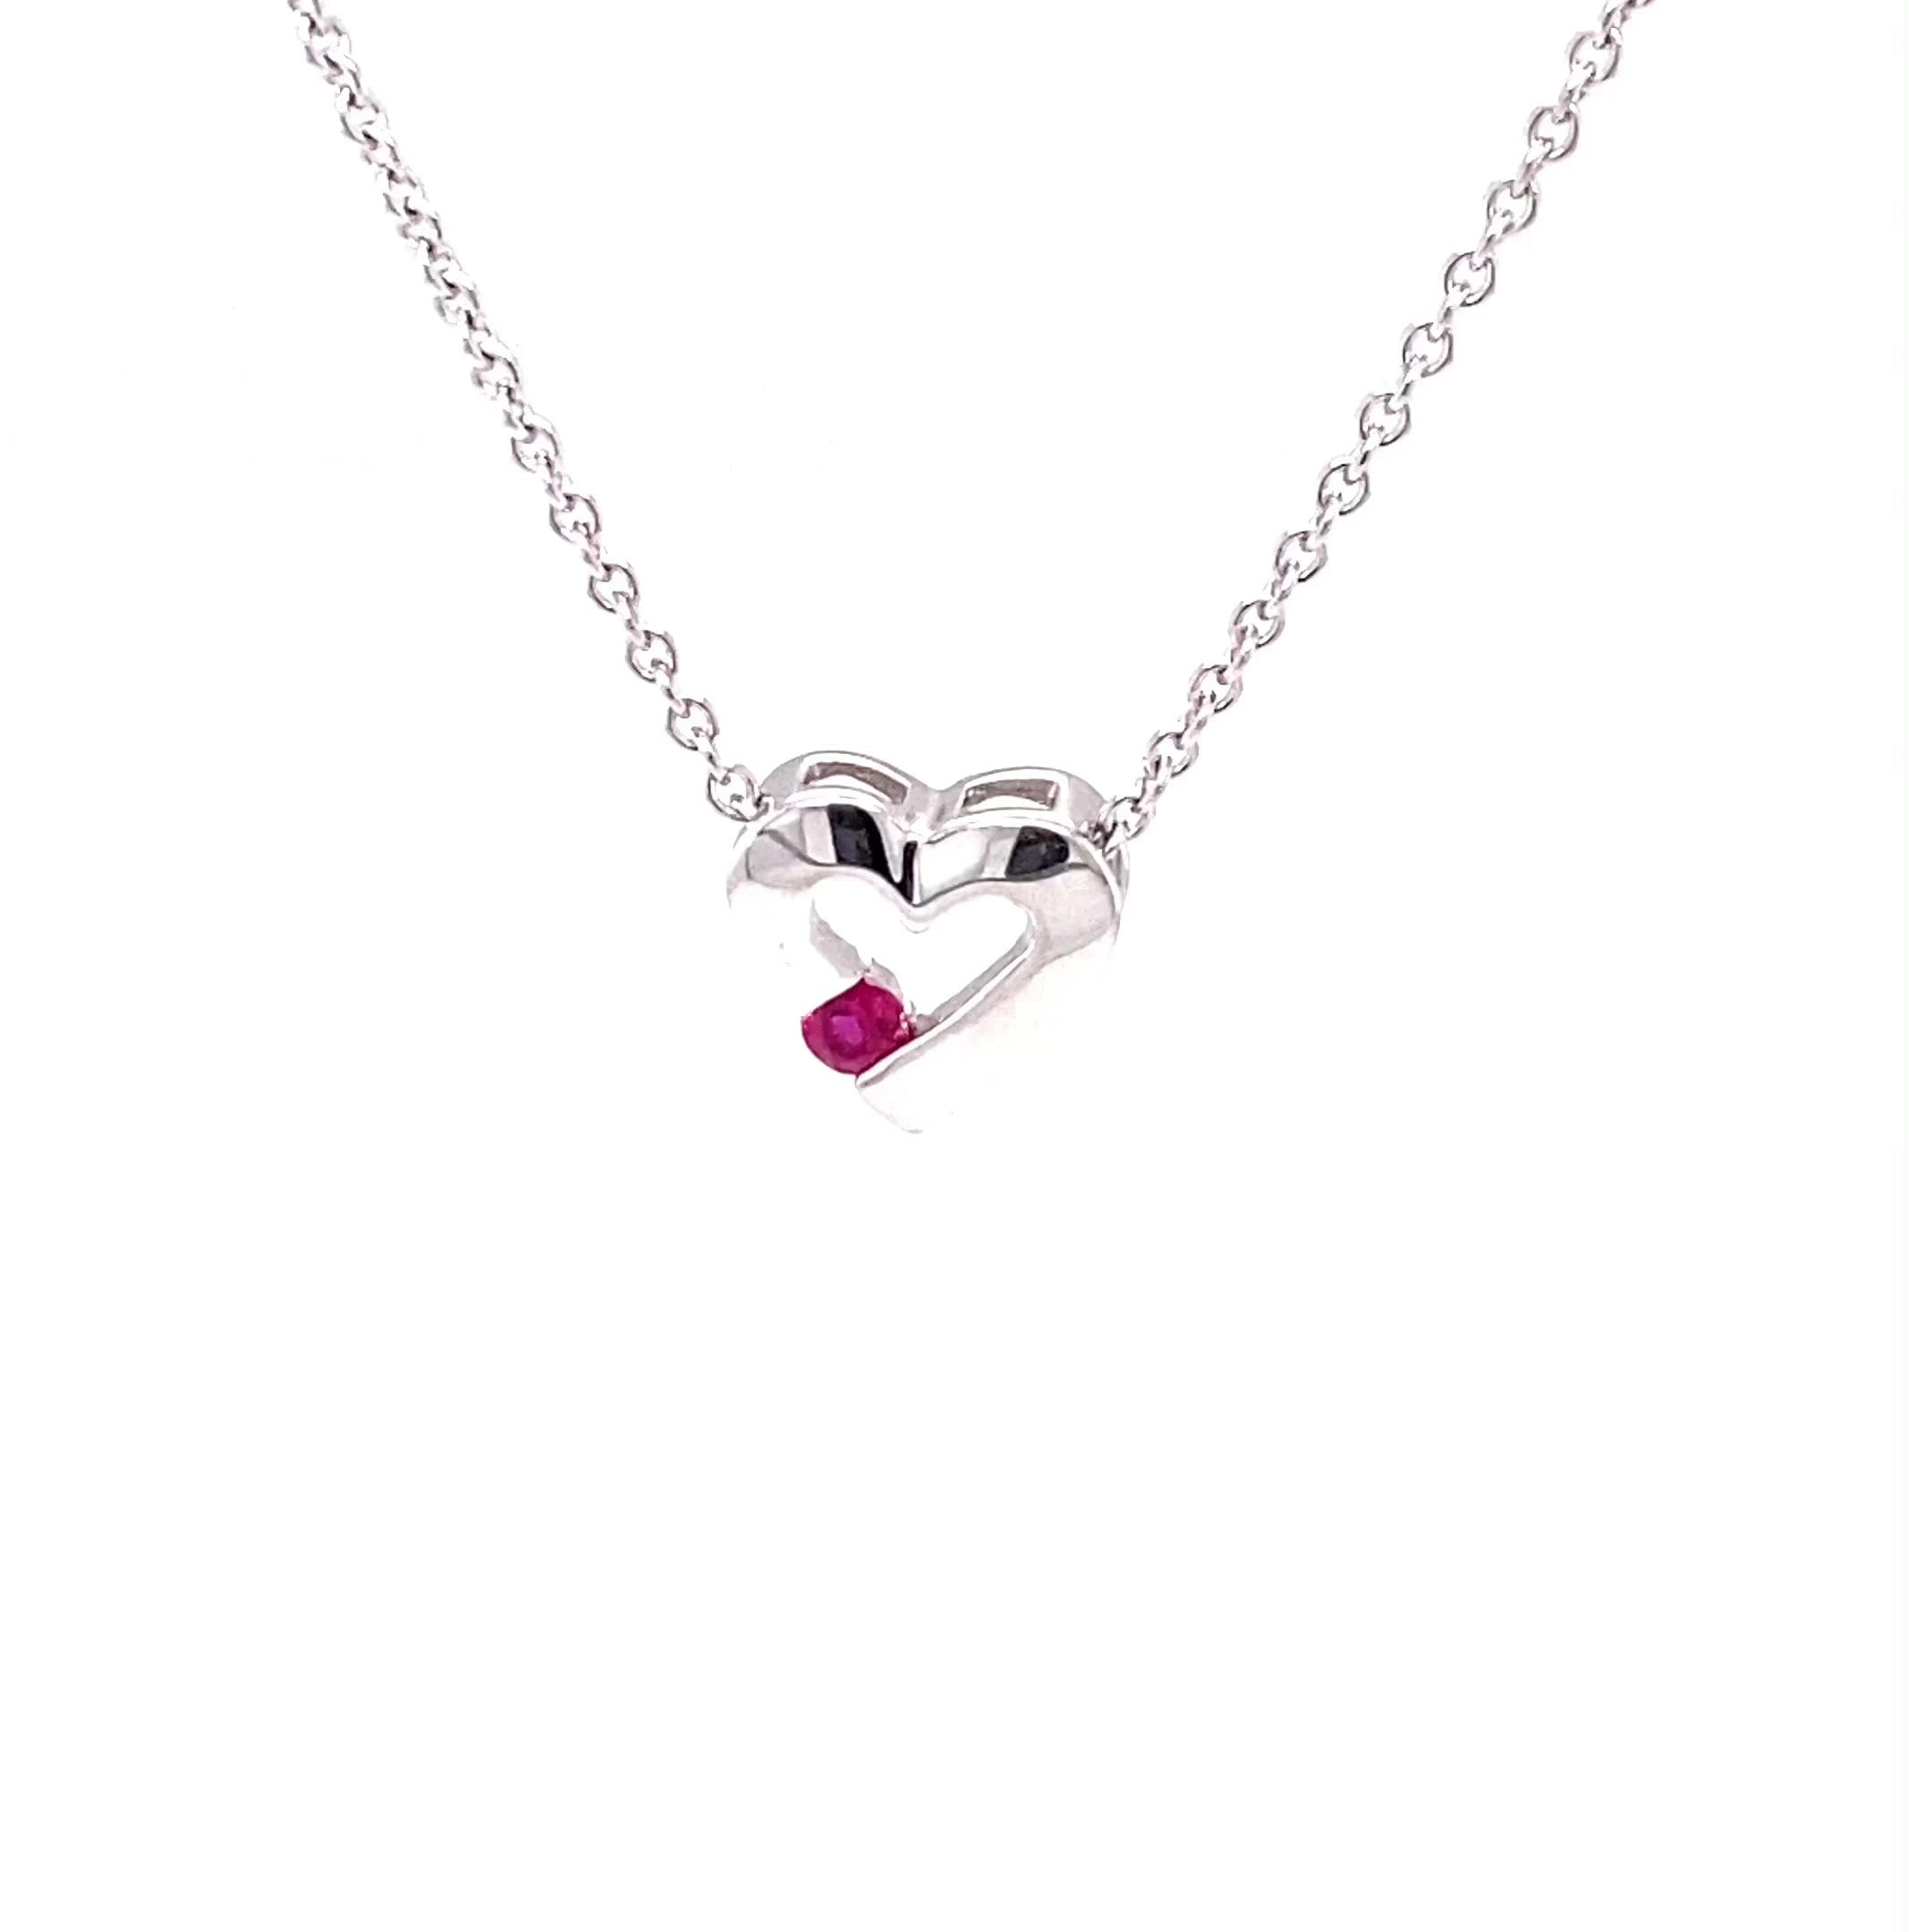 Natural Ruby Necklace 14K Solid White Gold .15ct Heart Necklace Pendant Necklace Birthstone Necklace Valentines Day Love Statement Jewelry